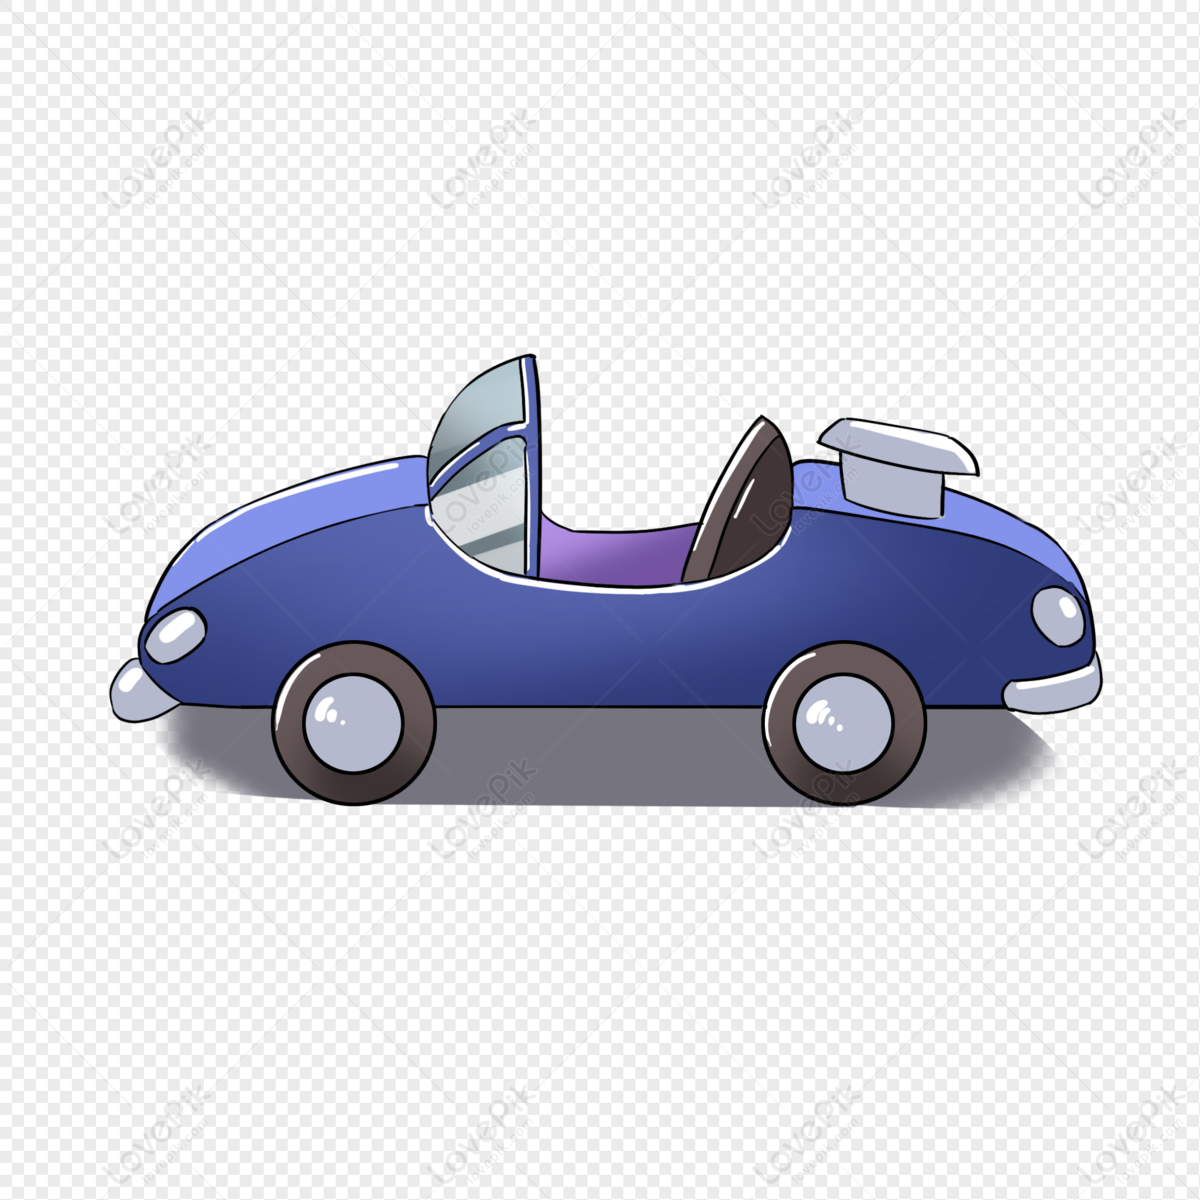 Blue Sports Car Toy PNG White Transparent And Clipart Image For Free  Download - Lovepik | 401184912